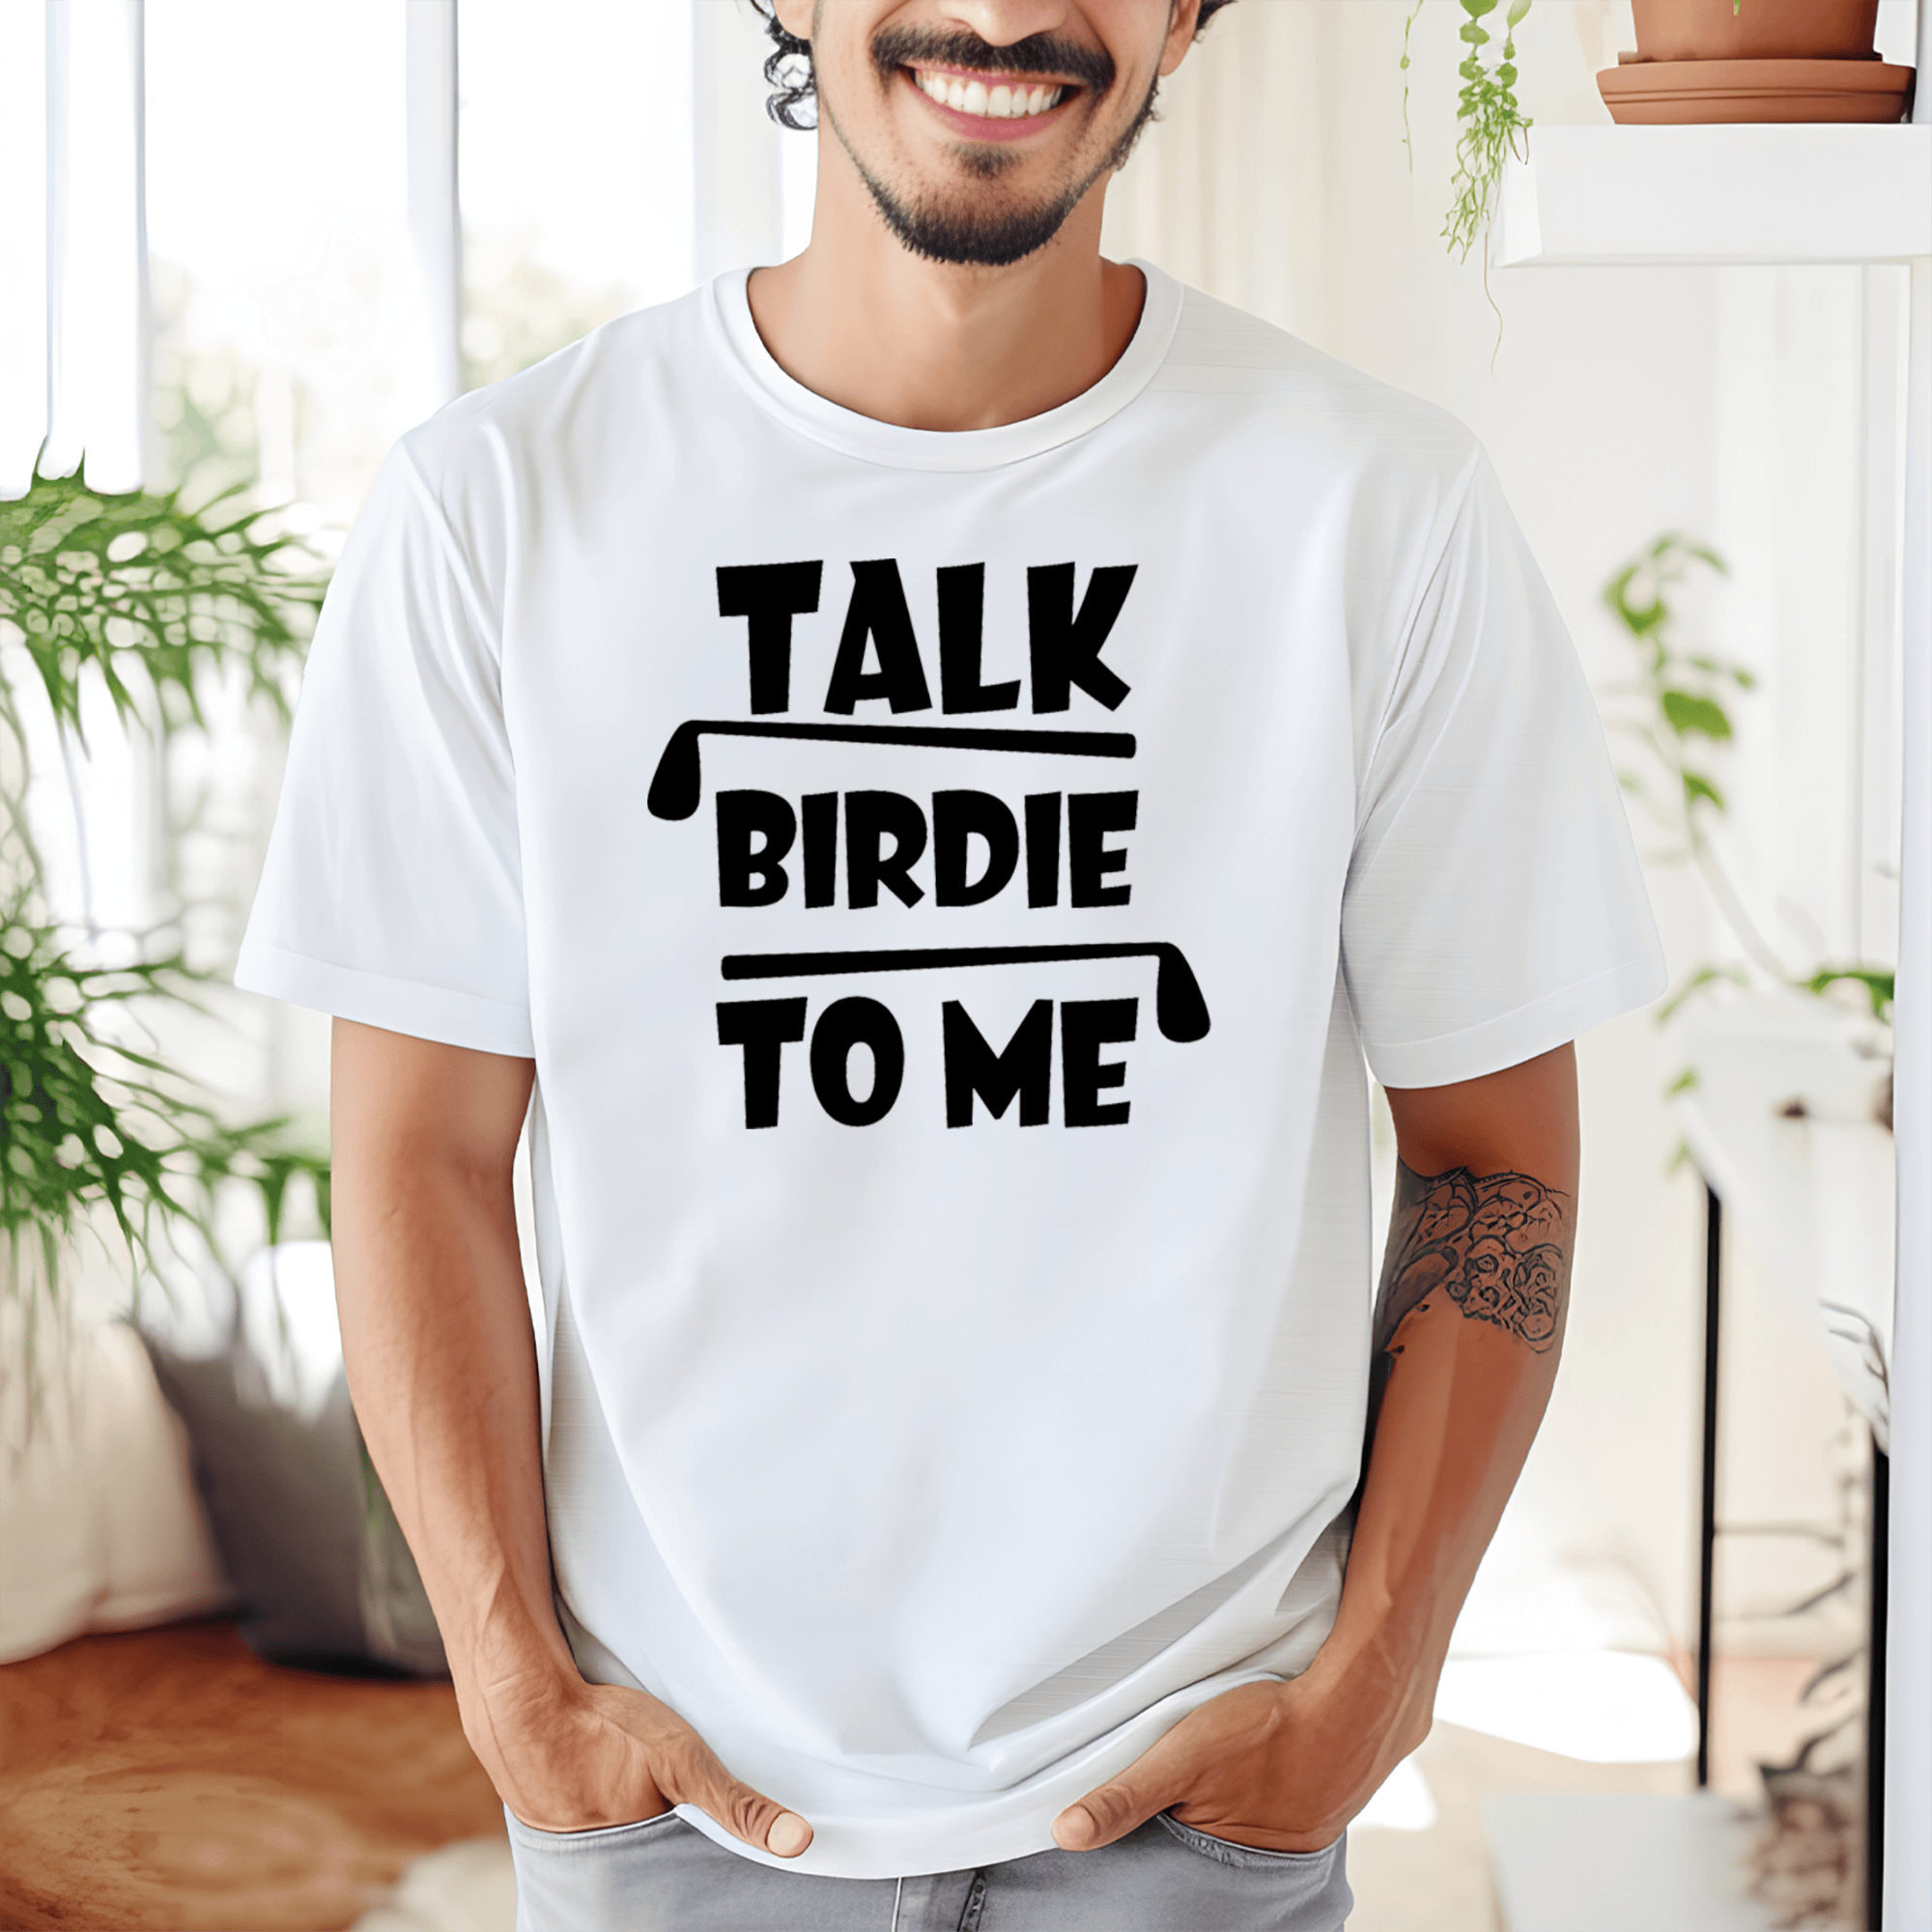 White Mens T-Shirt With Dirty Birdie Design